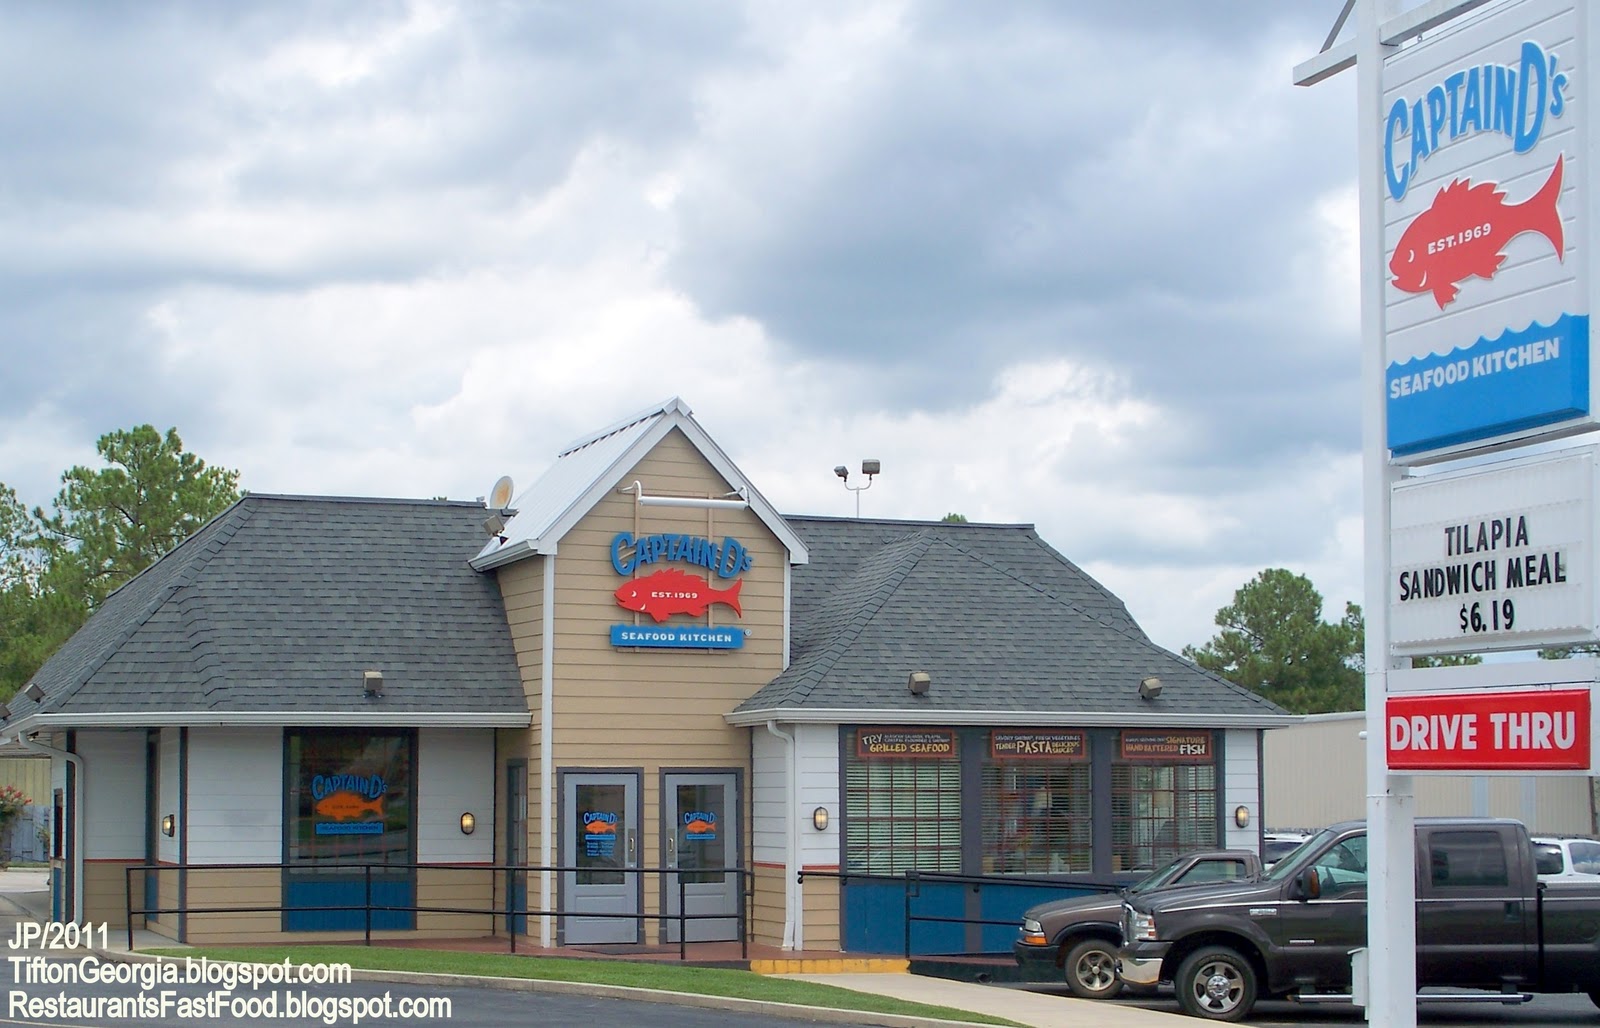 Where can you view a menu and pricing for Captain D's Seafood Kitchen?